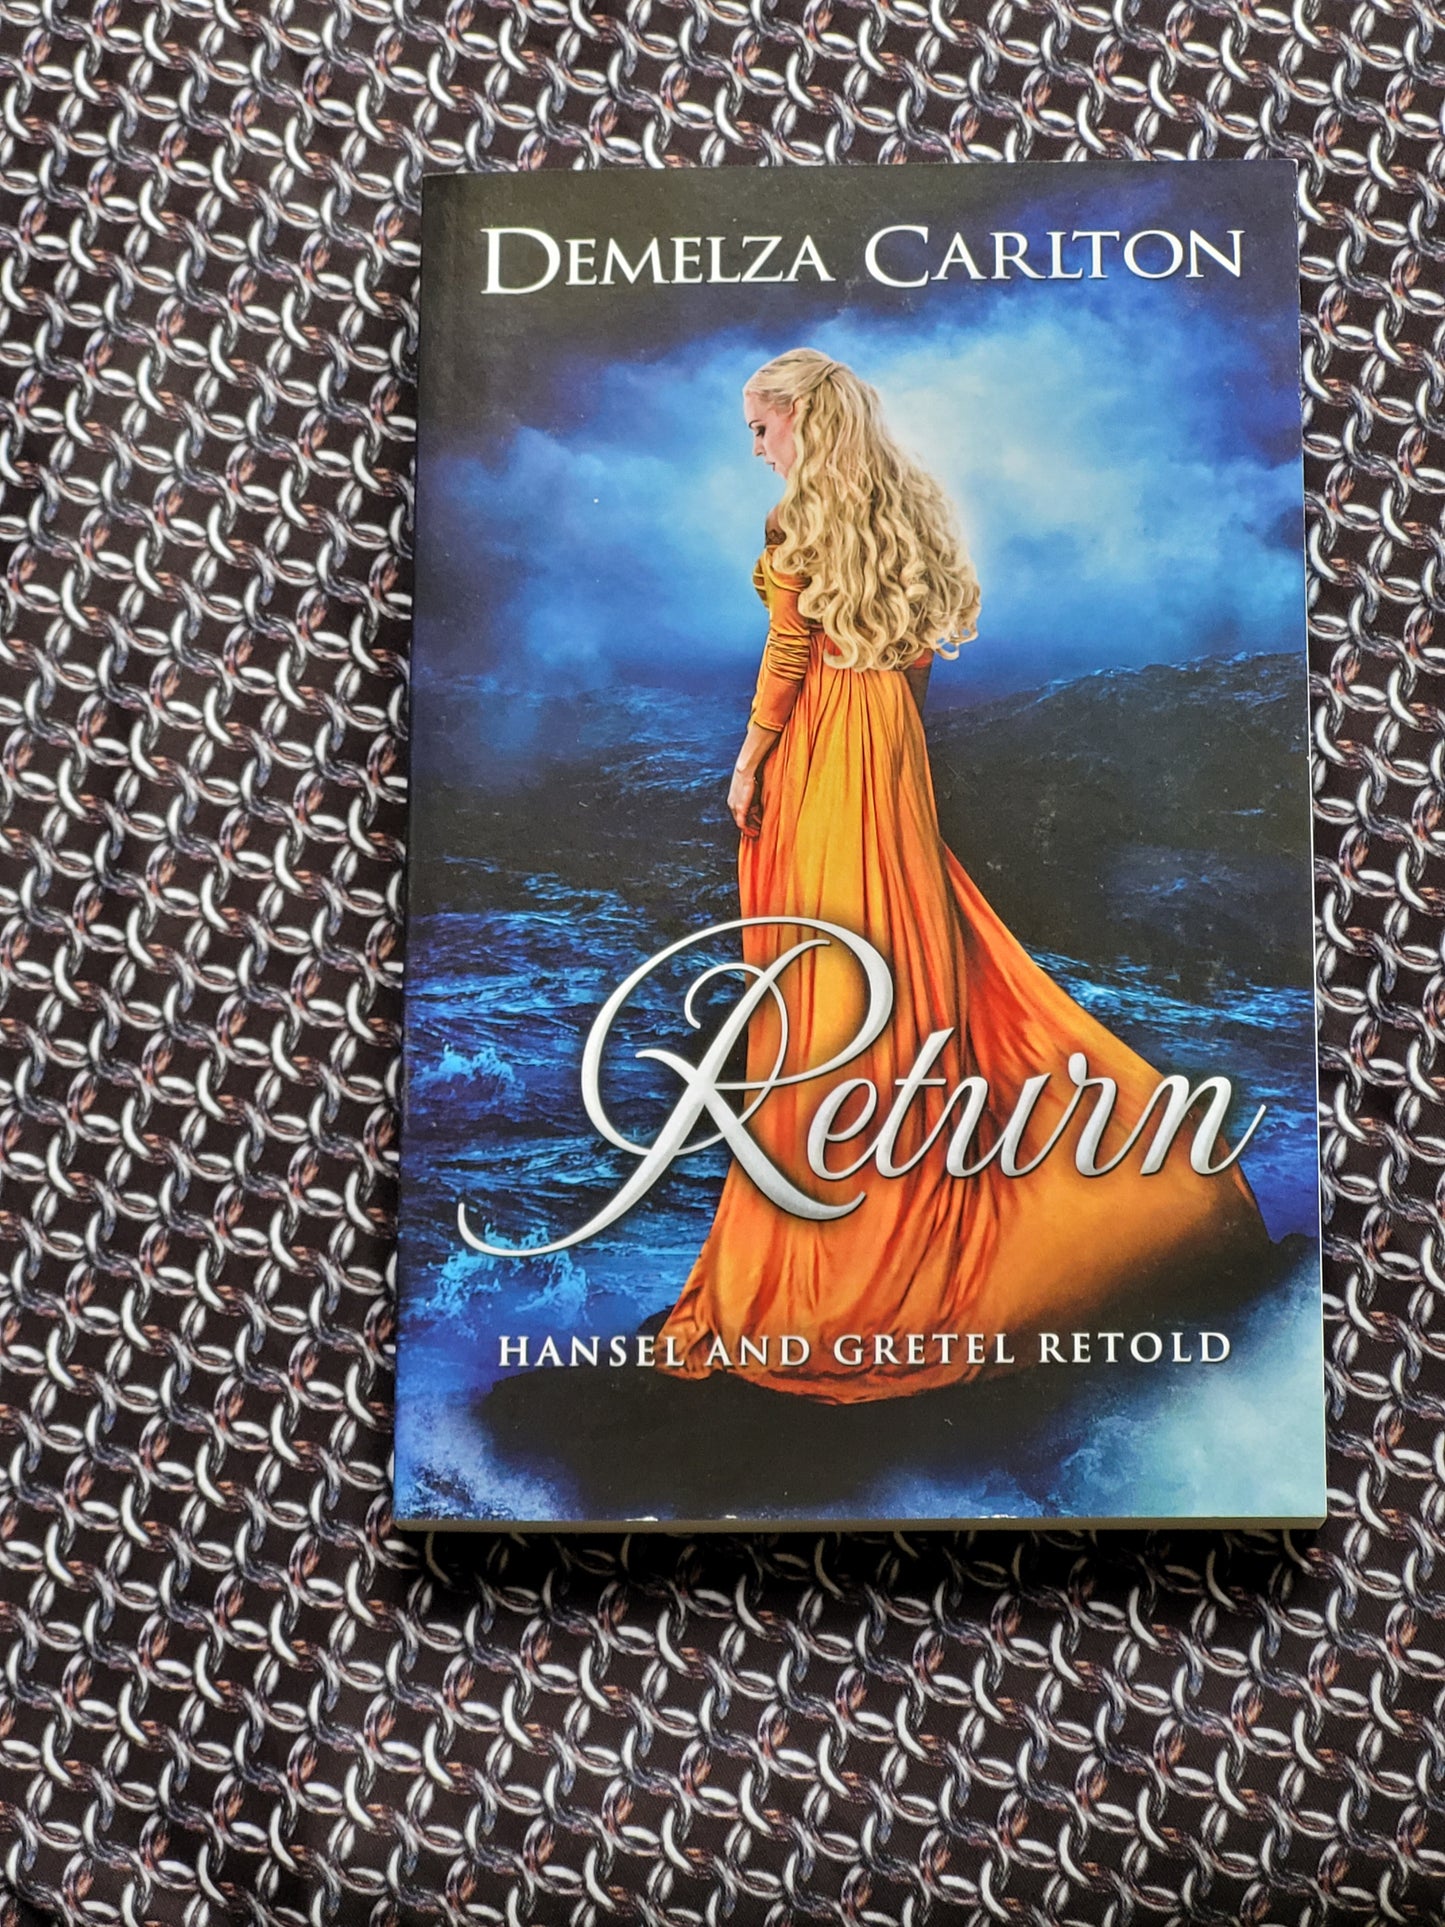 Return: Hansel and Gretel Retold (Book 10 in the Romance a Medieval Fairytale series) PAPERBACK